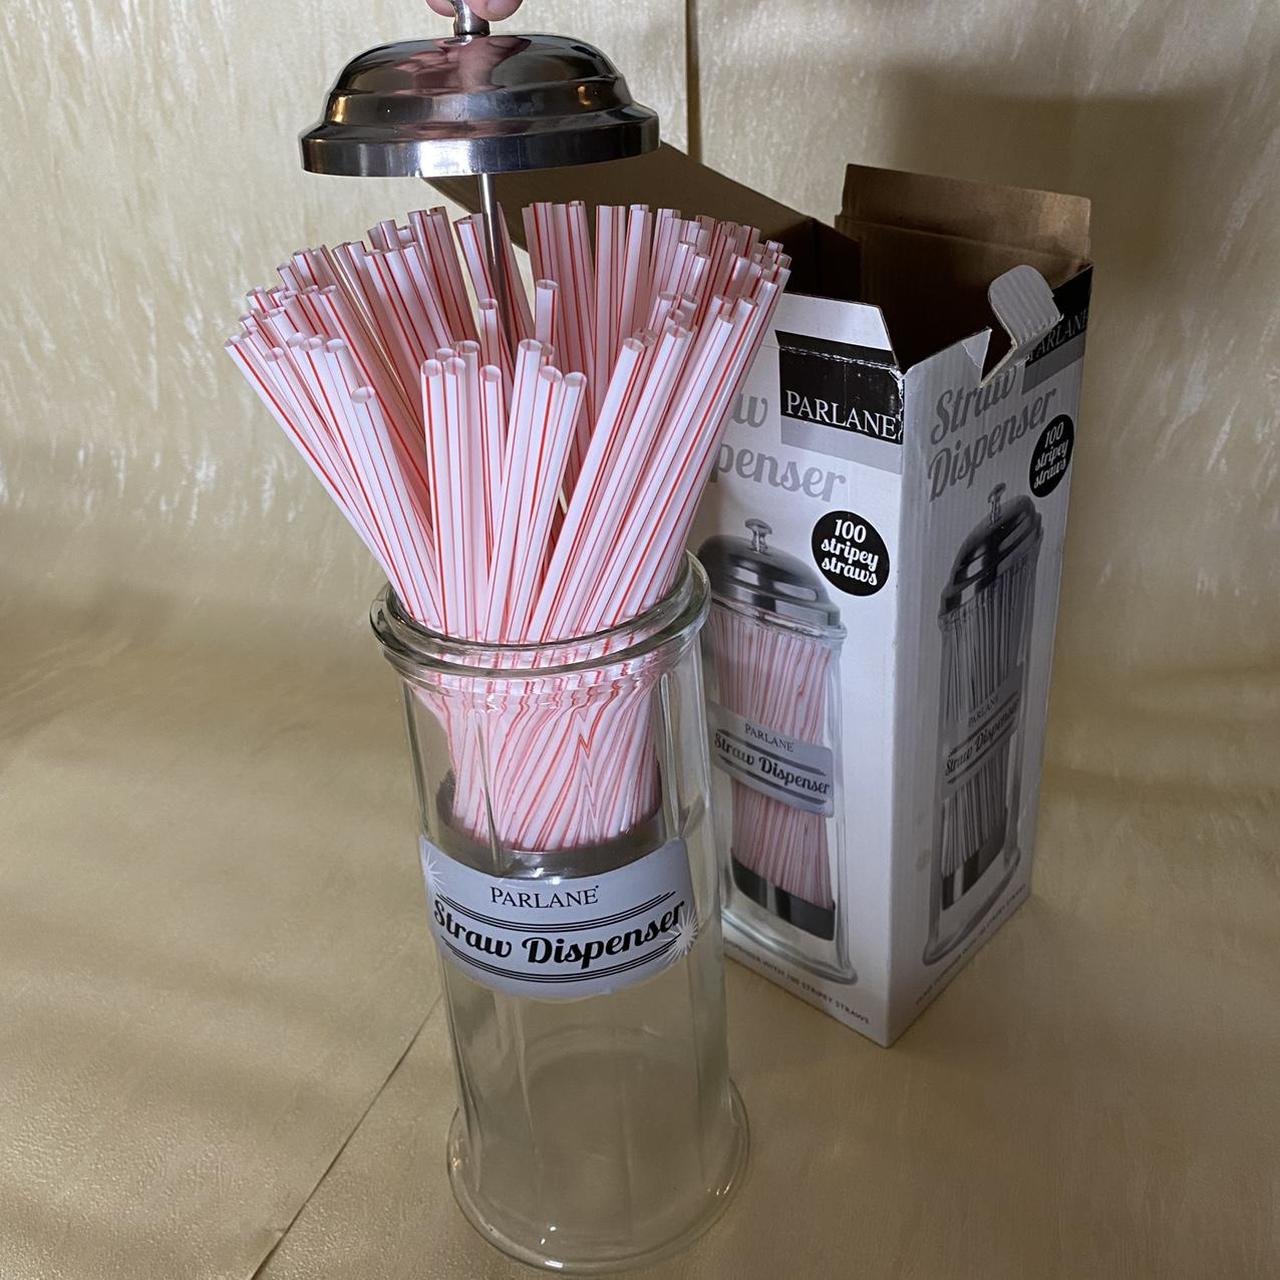 Product Image 4 - 🎄 Christmas Gifts 🎄

Straw dispenser.